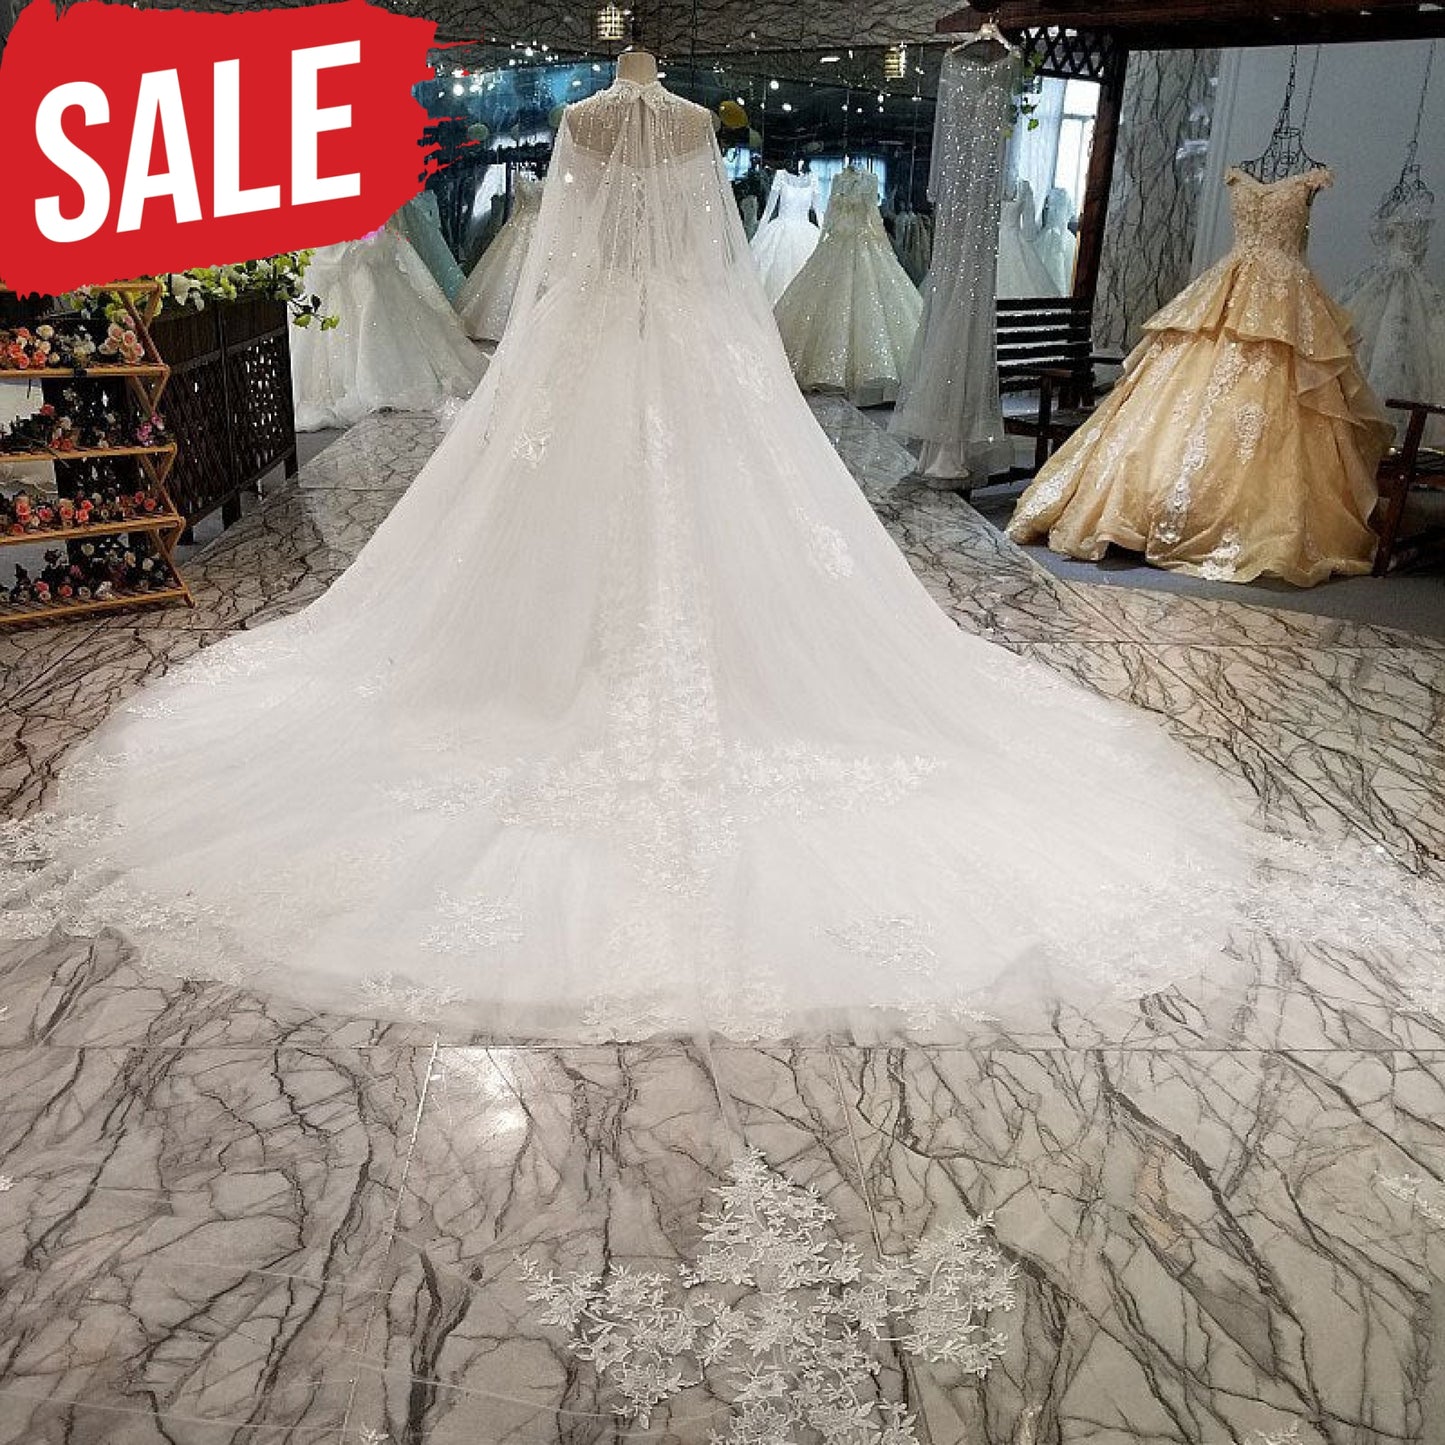 Lace Bridal Robes Bride Gownsing Dress Lace Bridal Robes Bride Gownsing Dress Lace Bridal Robes Bride Gownsing DressLace Bridal Robes Bride Gownsing Dress Lace Bridal Robes Bride Gownsing Dress